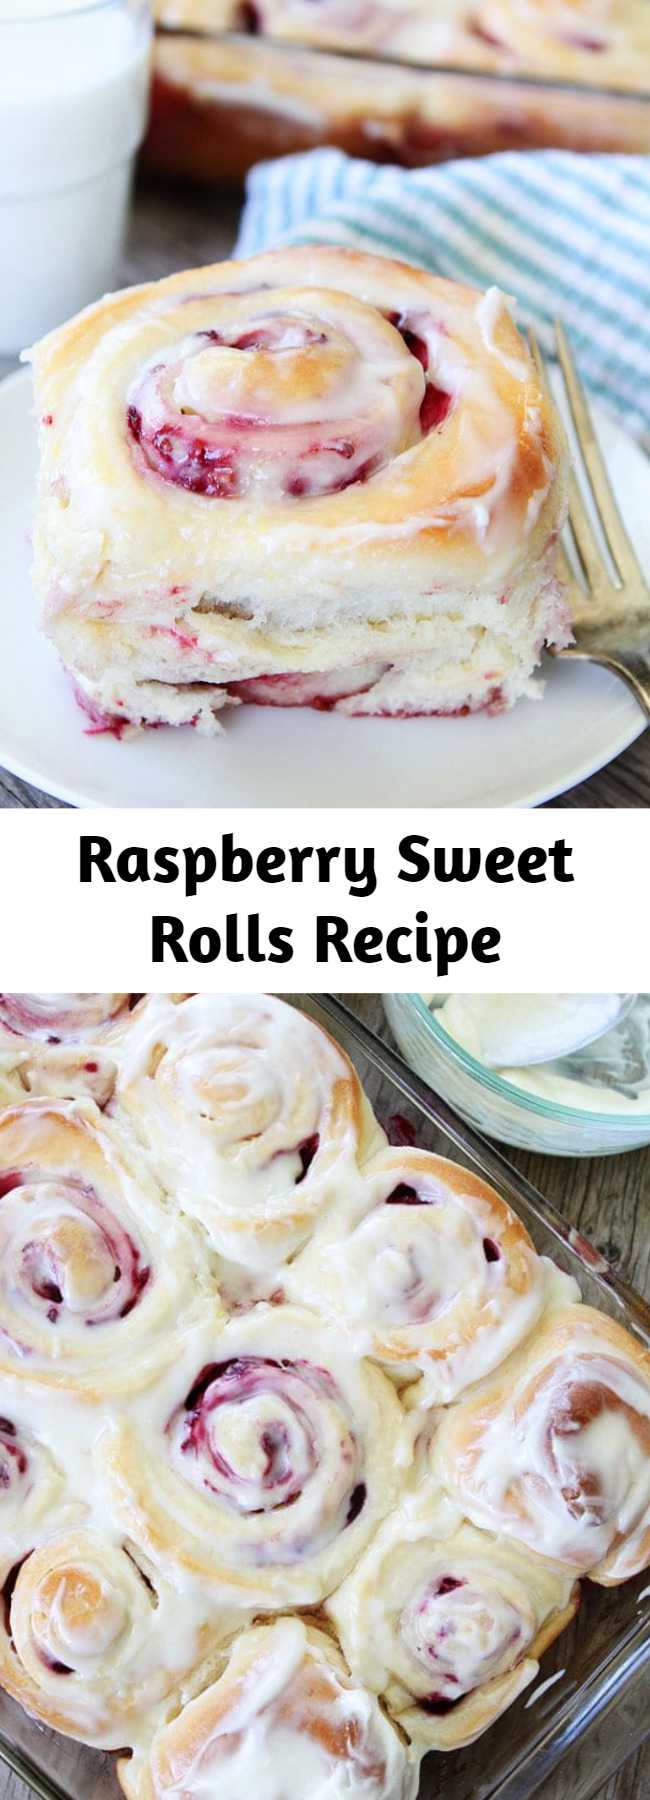 Raspberry Sweet Rolls Recipe - Raspberry Sweet Rolls-soft and sweet yeast rolls filled with raspberries and topped with cream cheese frosting. These sweet rolls are perfect for breakfast or brunch!